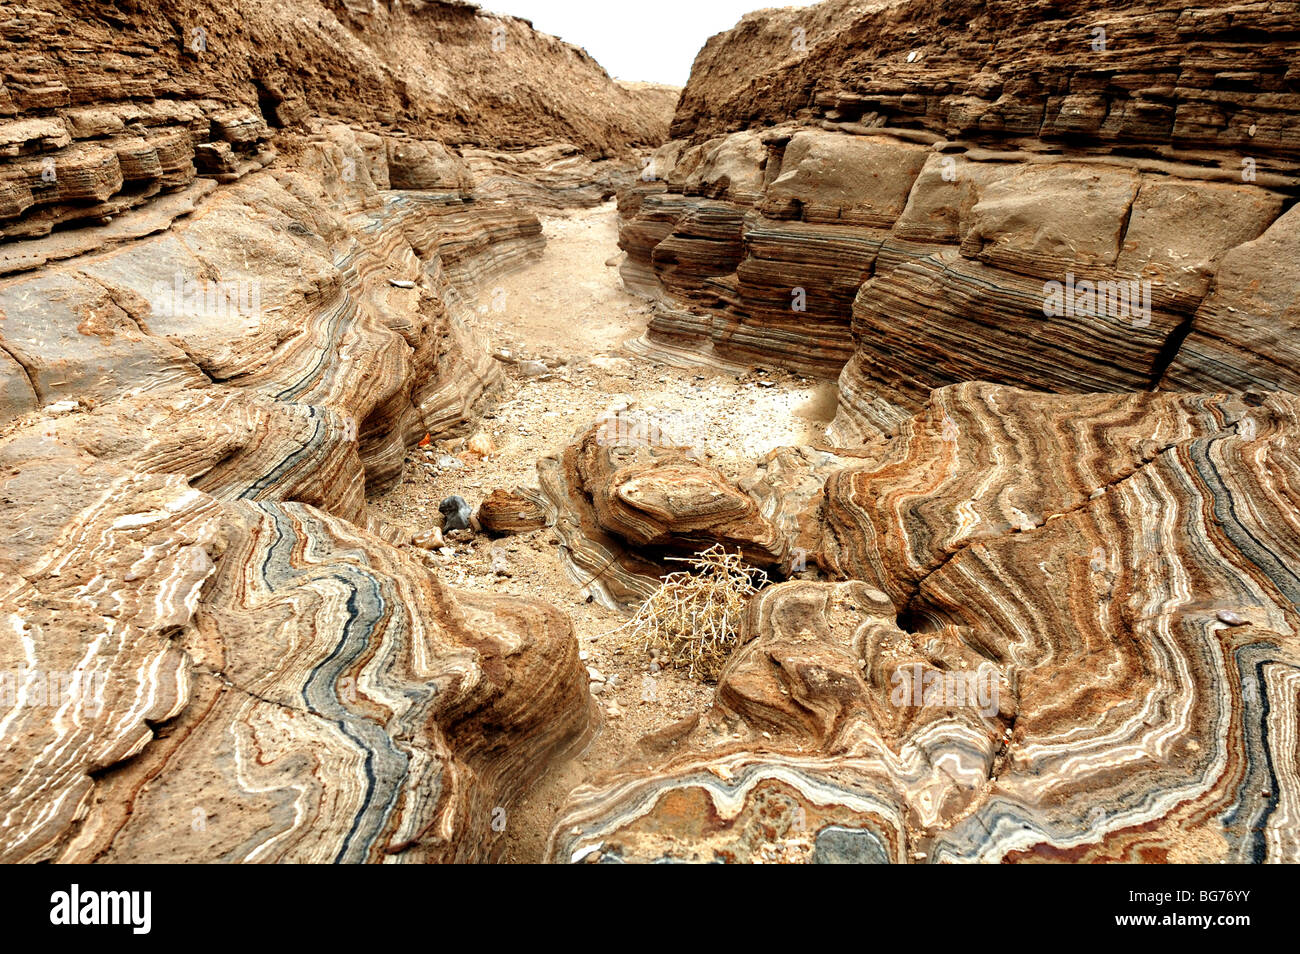 Israel, Negev, sediment layers in a dry riverbed Stock Photo